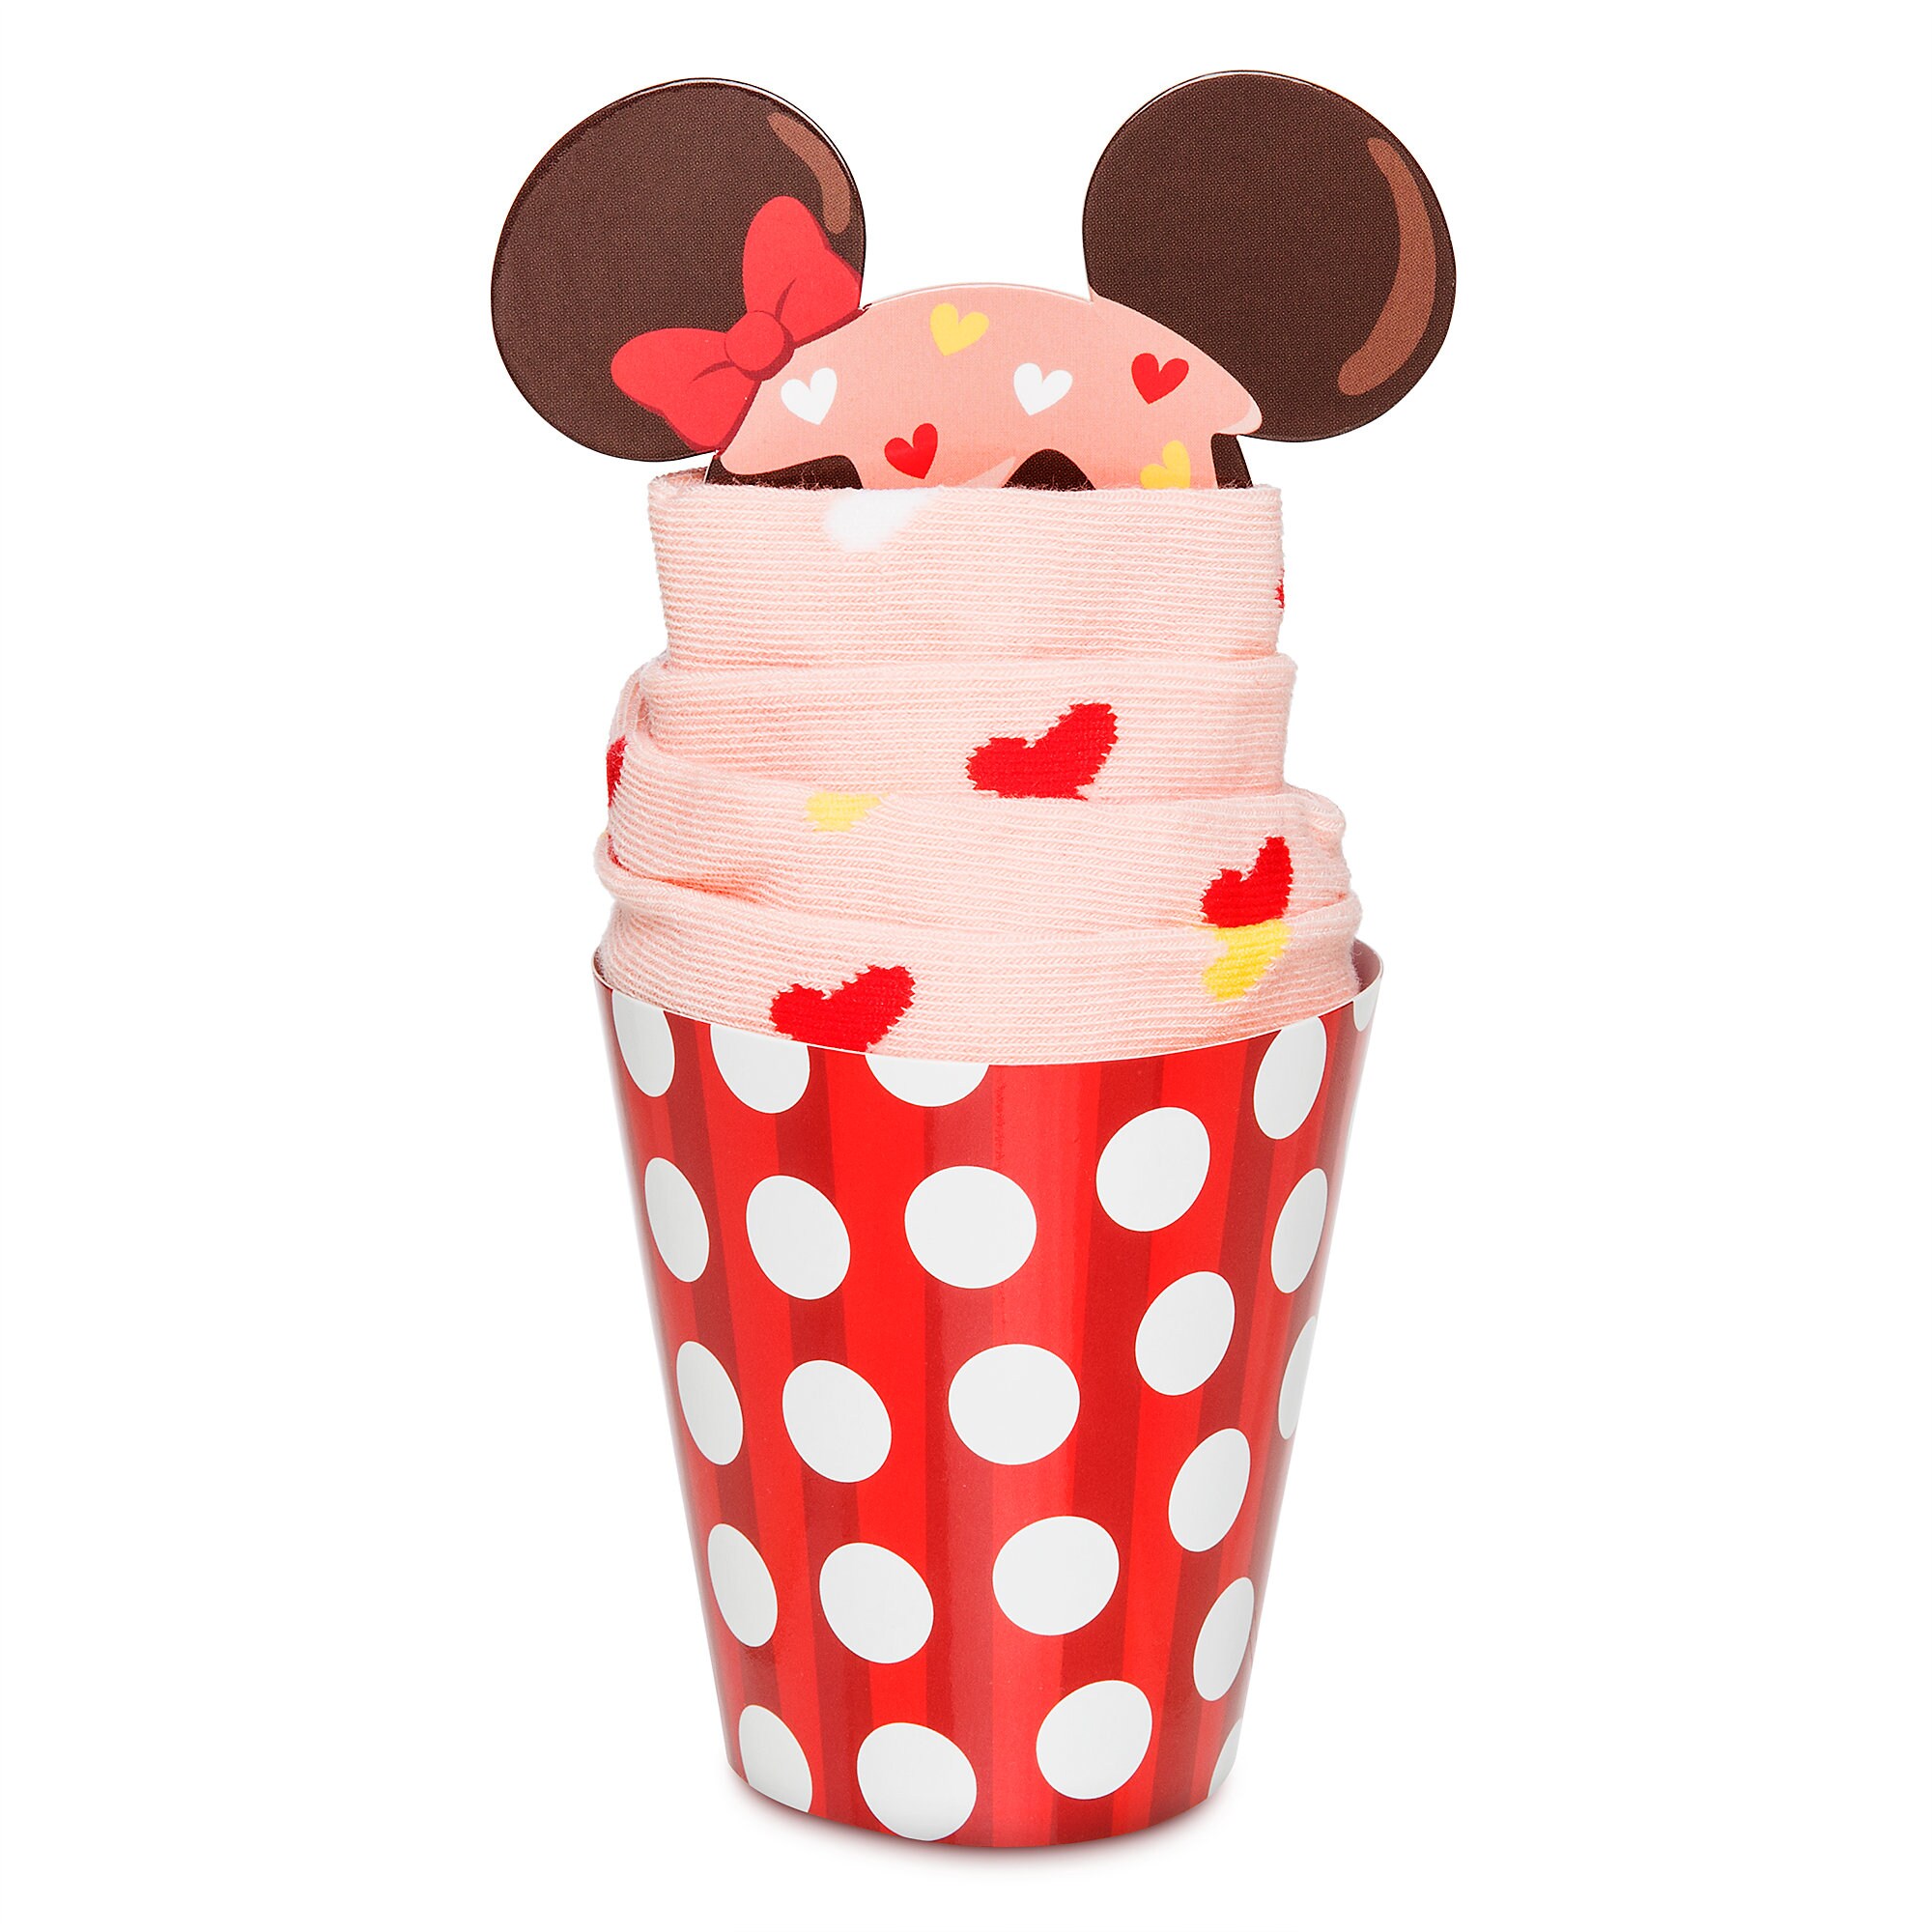 Minnie Mouse Cupcake Socks for Adults